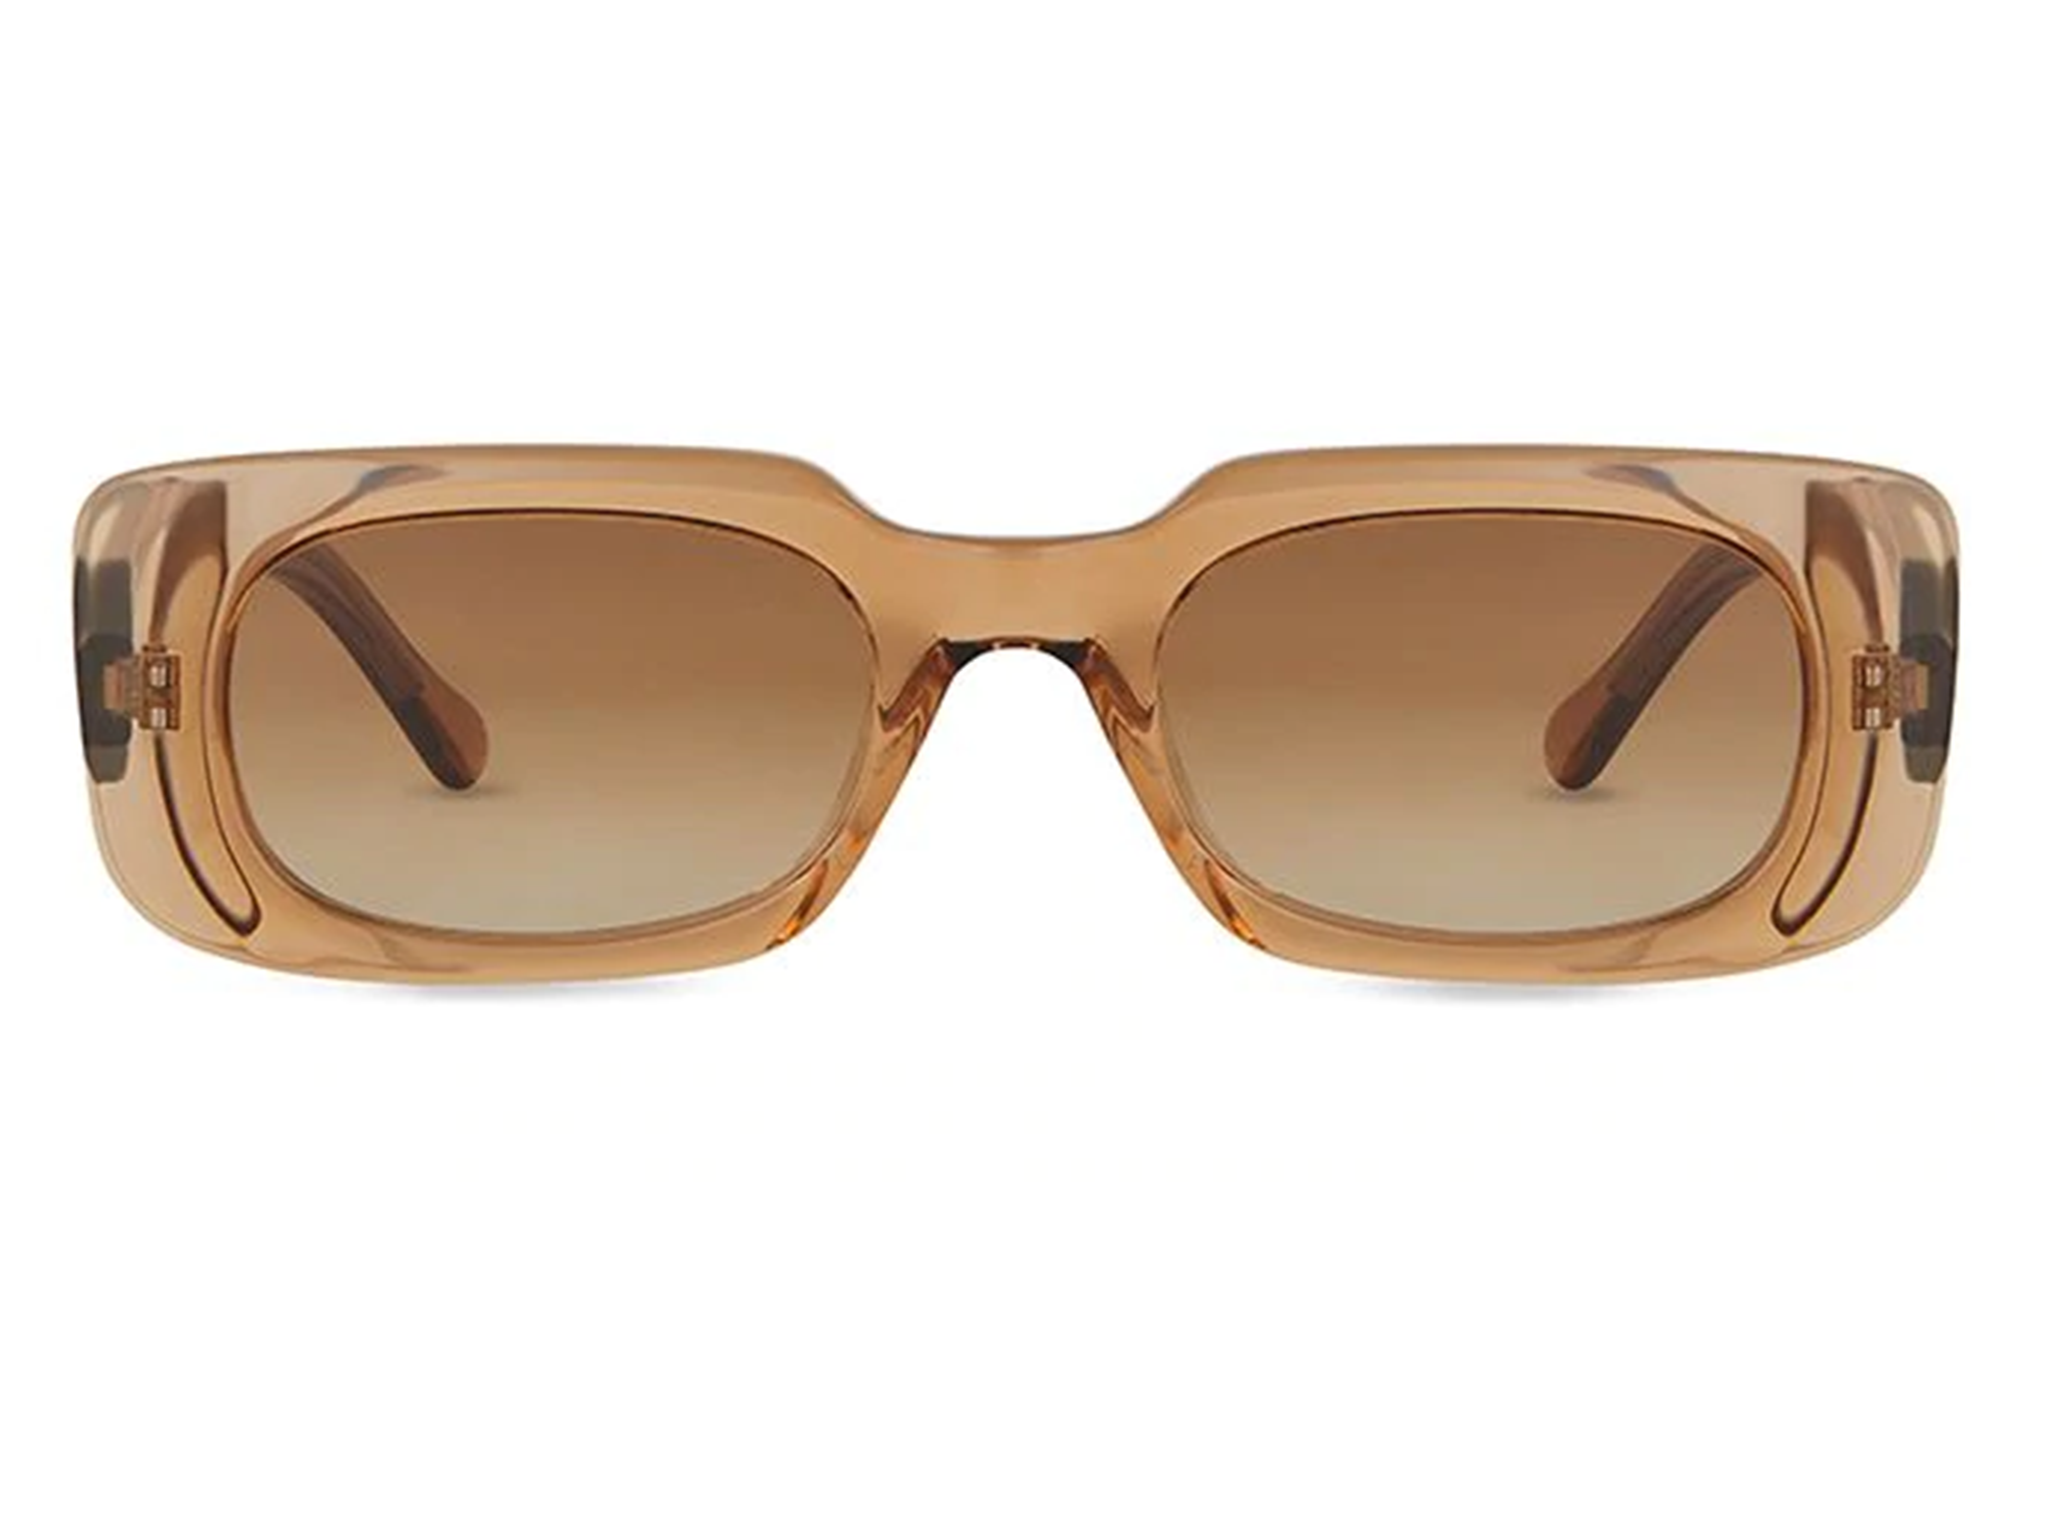 Front_View_Finlay_Kendall_Butterscotch_BrowntoWhite_Sunglasses_738x.png